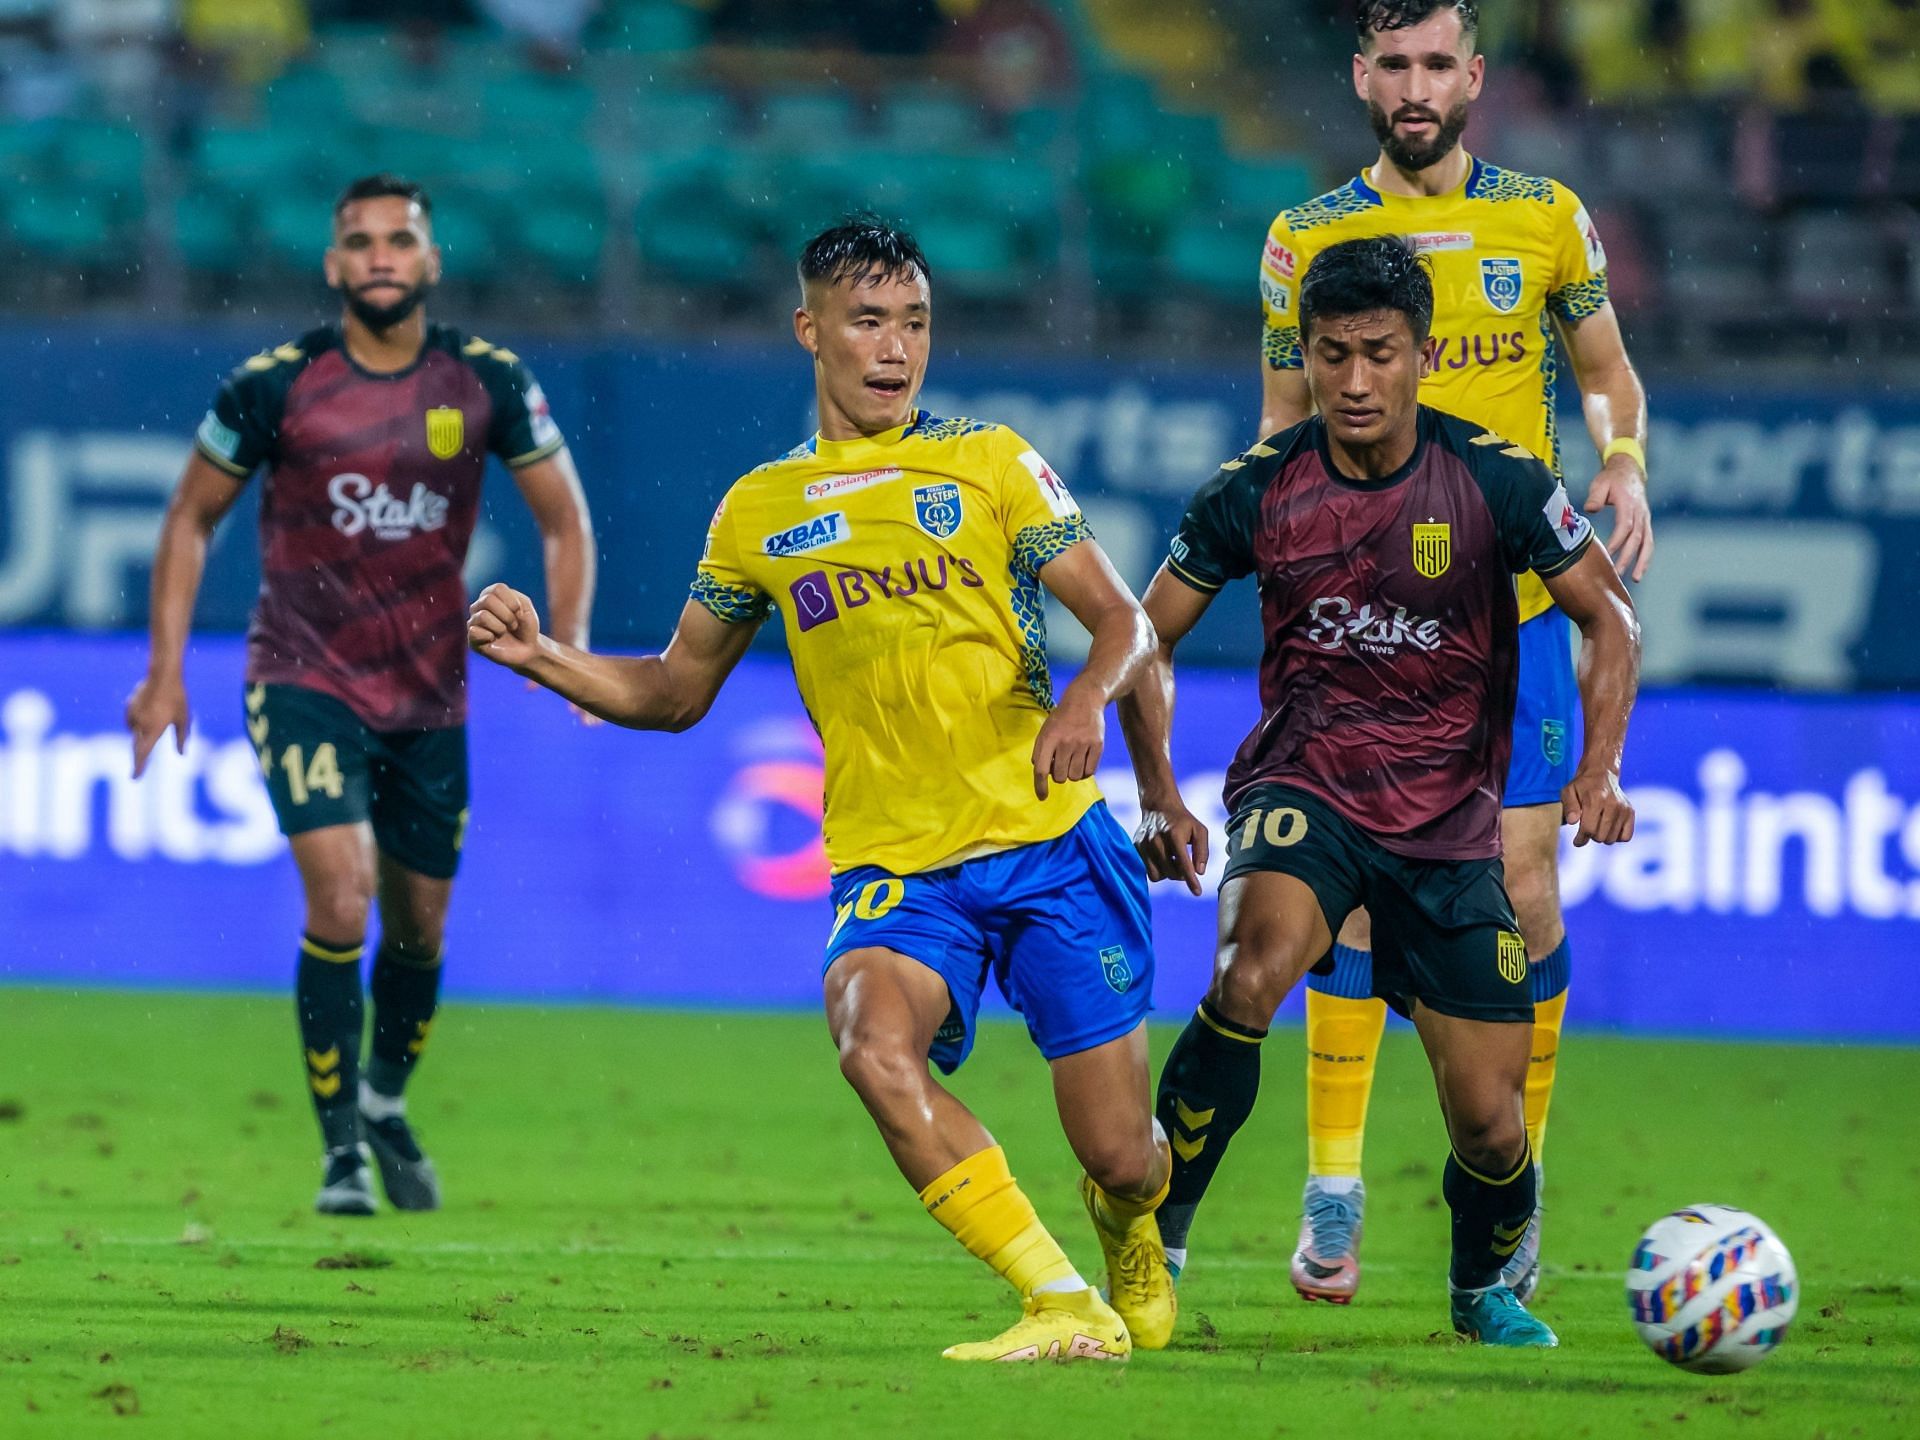 Naocha Singh and Mohammad Yasir in action during the game on Saturday. (KBFC)